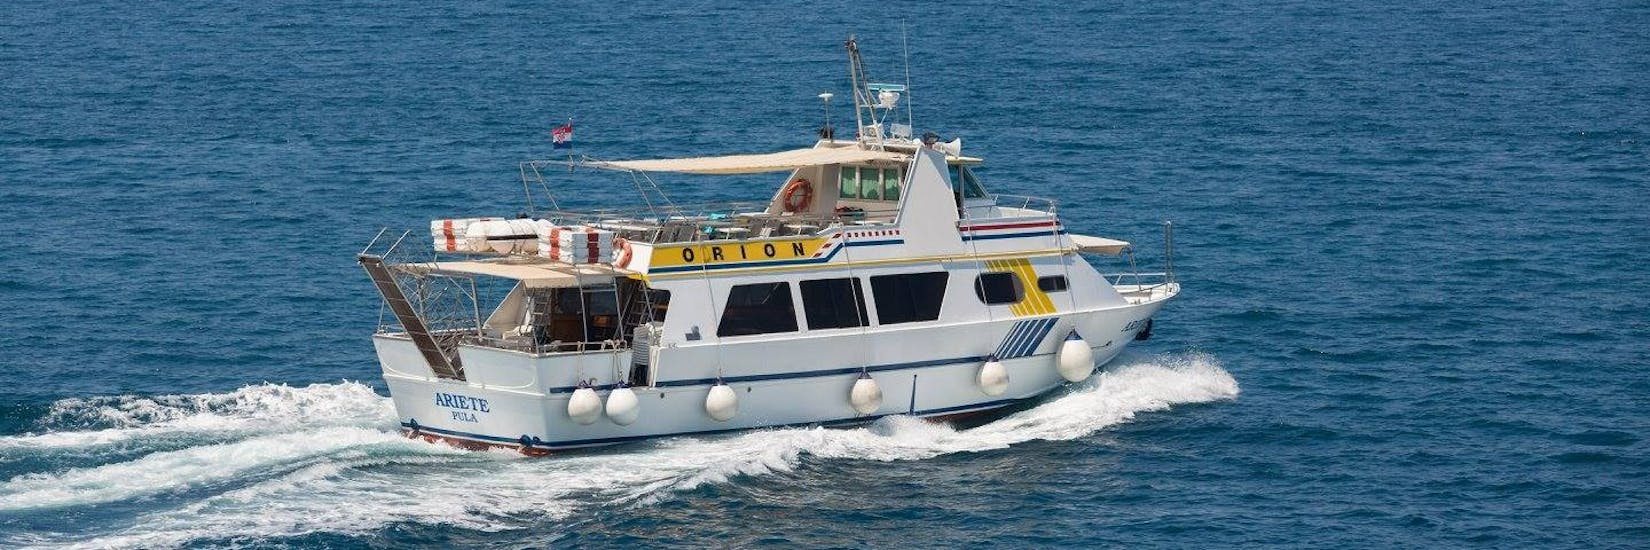 The boat from Orion Travel Pula on the sea during the Boat Trip from Pula to Rovinj.